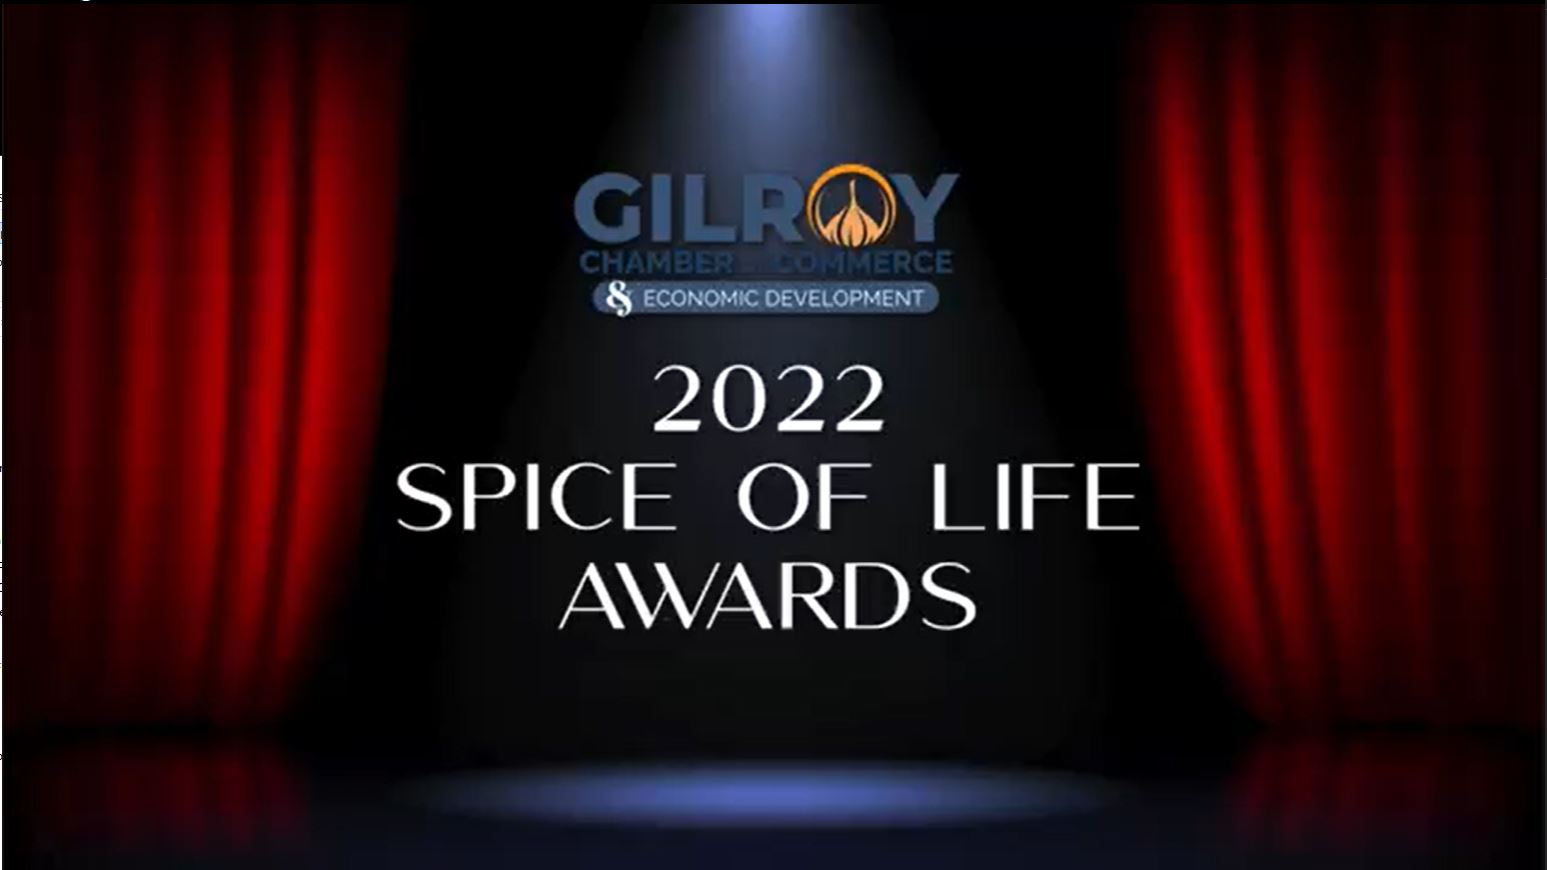 Spice of Life Awards banner with red theatrical drapes and a spotlight illuminating center stage and text that reads 2022 Spice of Life Awards